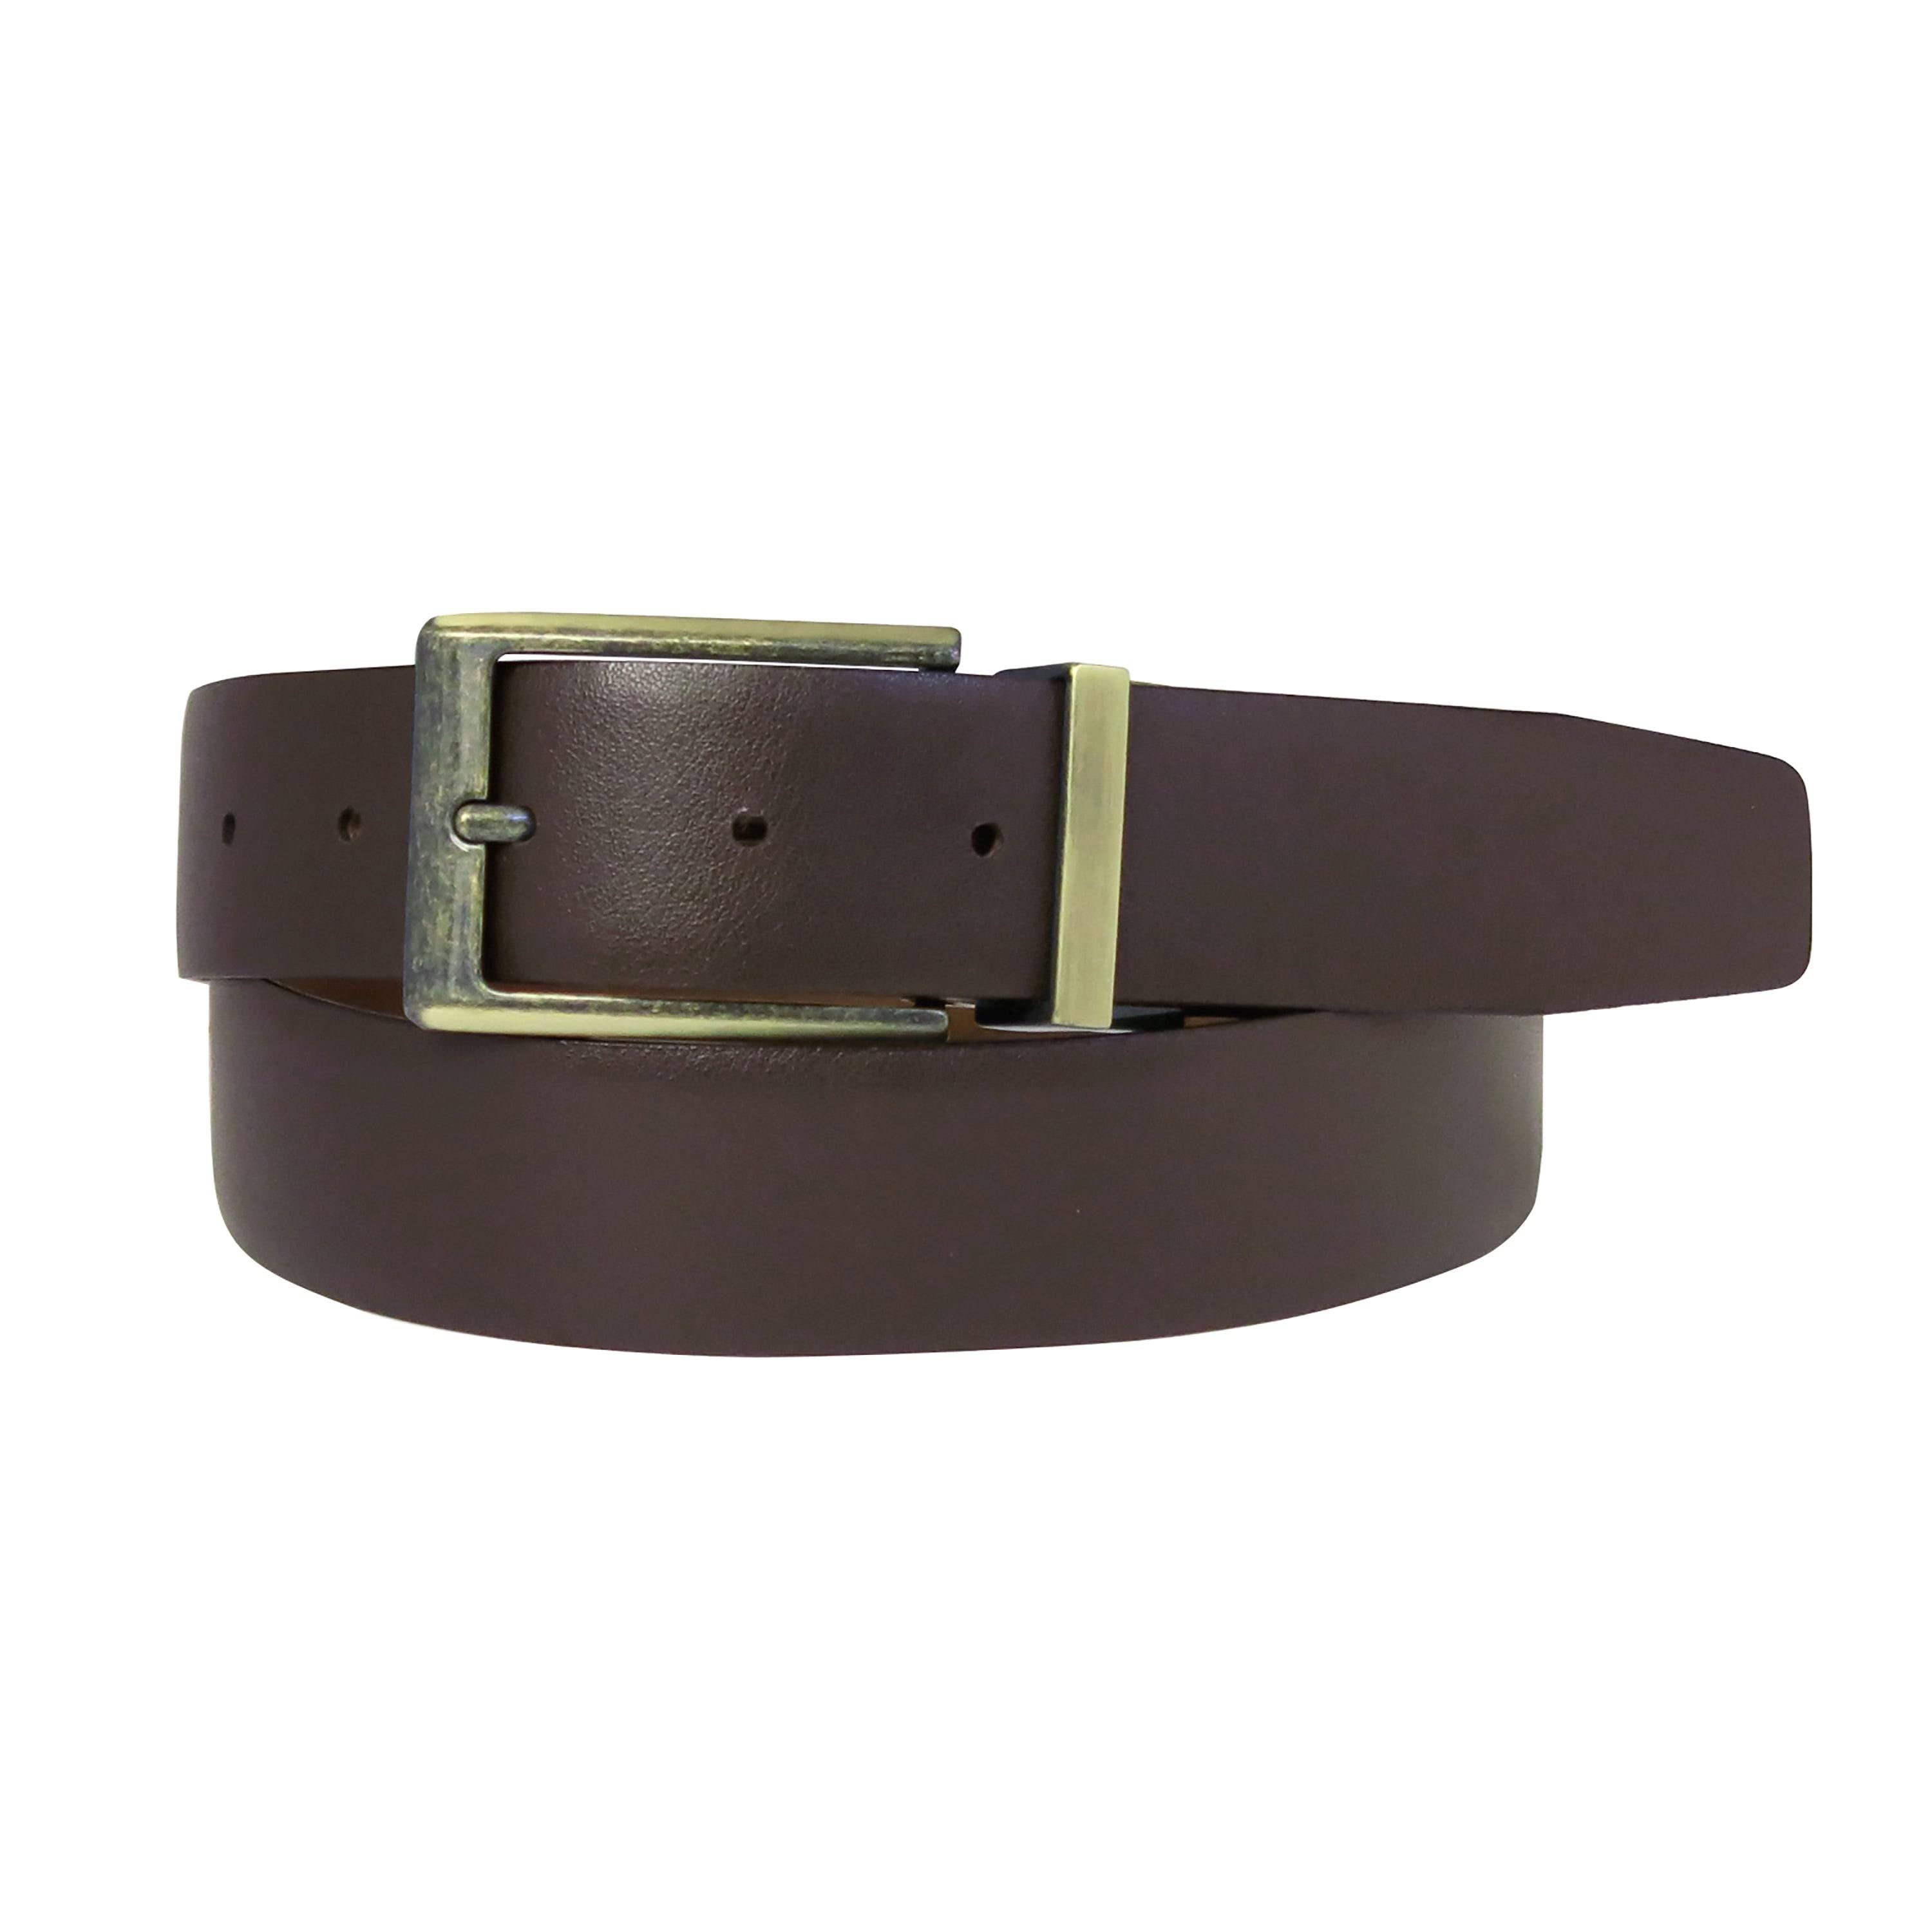 a brown leather belt with a brass buckle